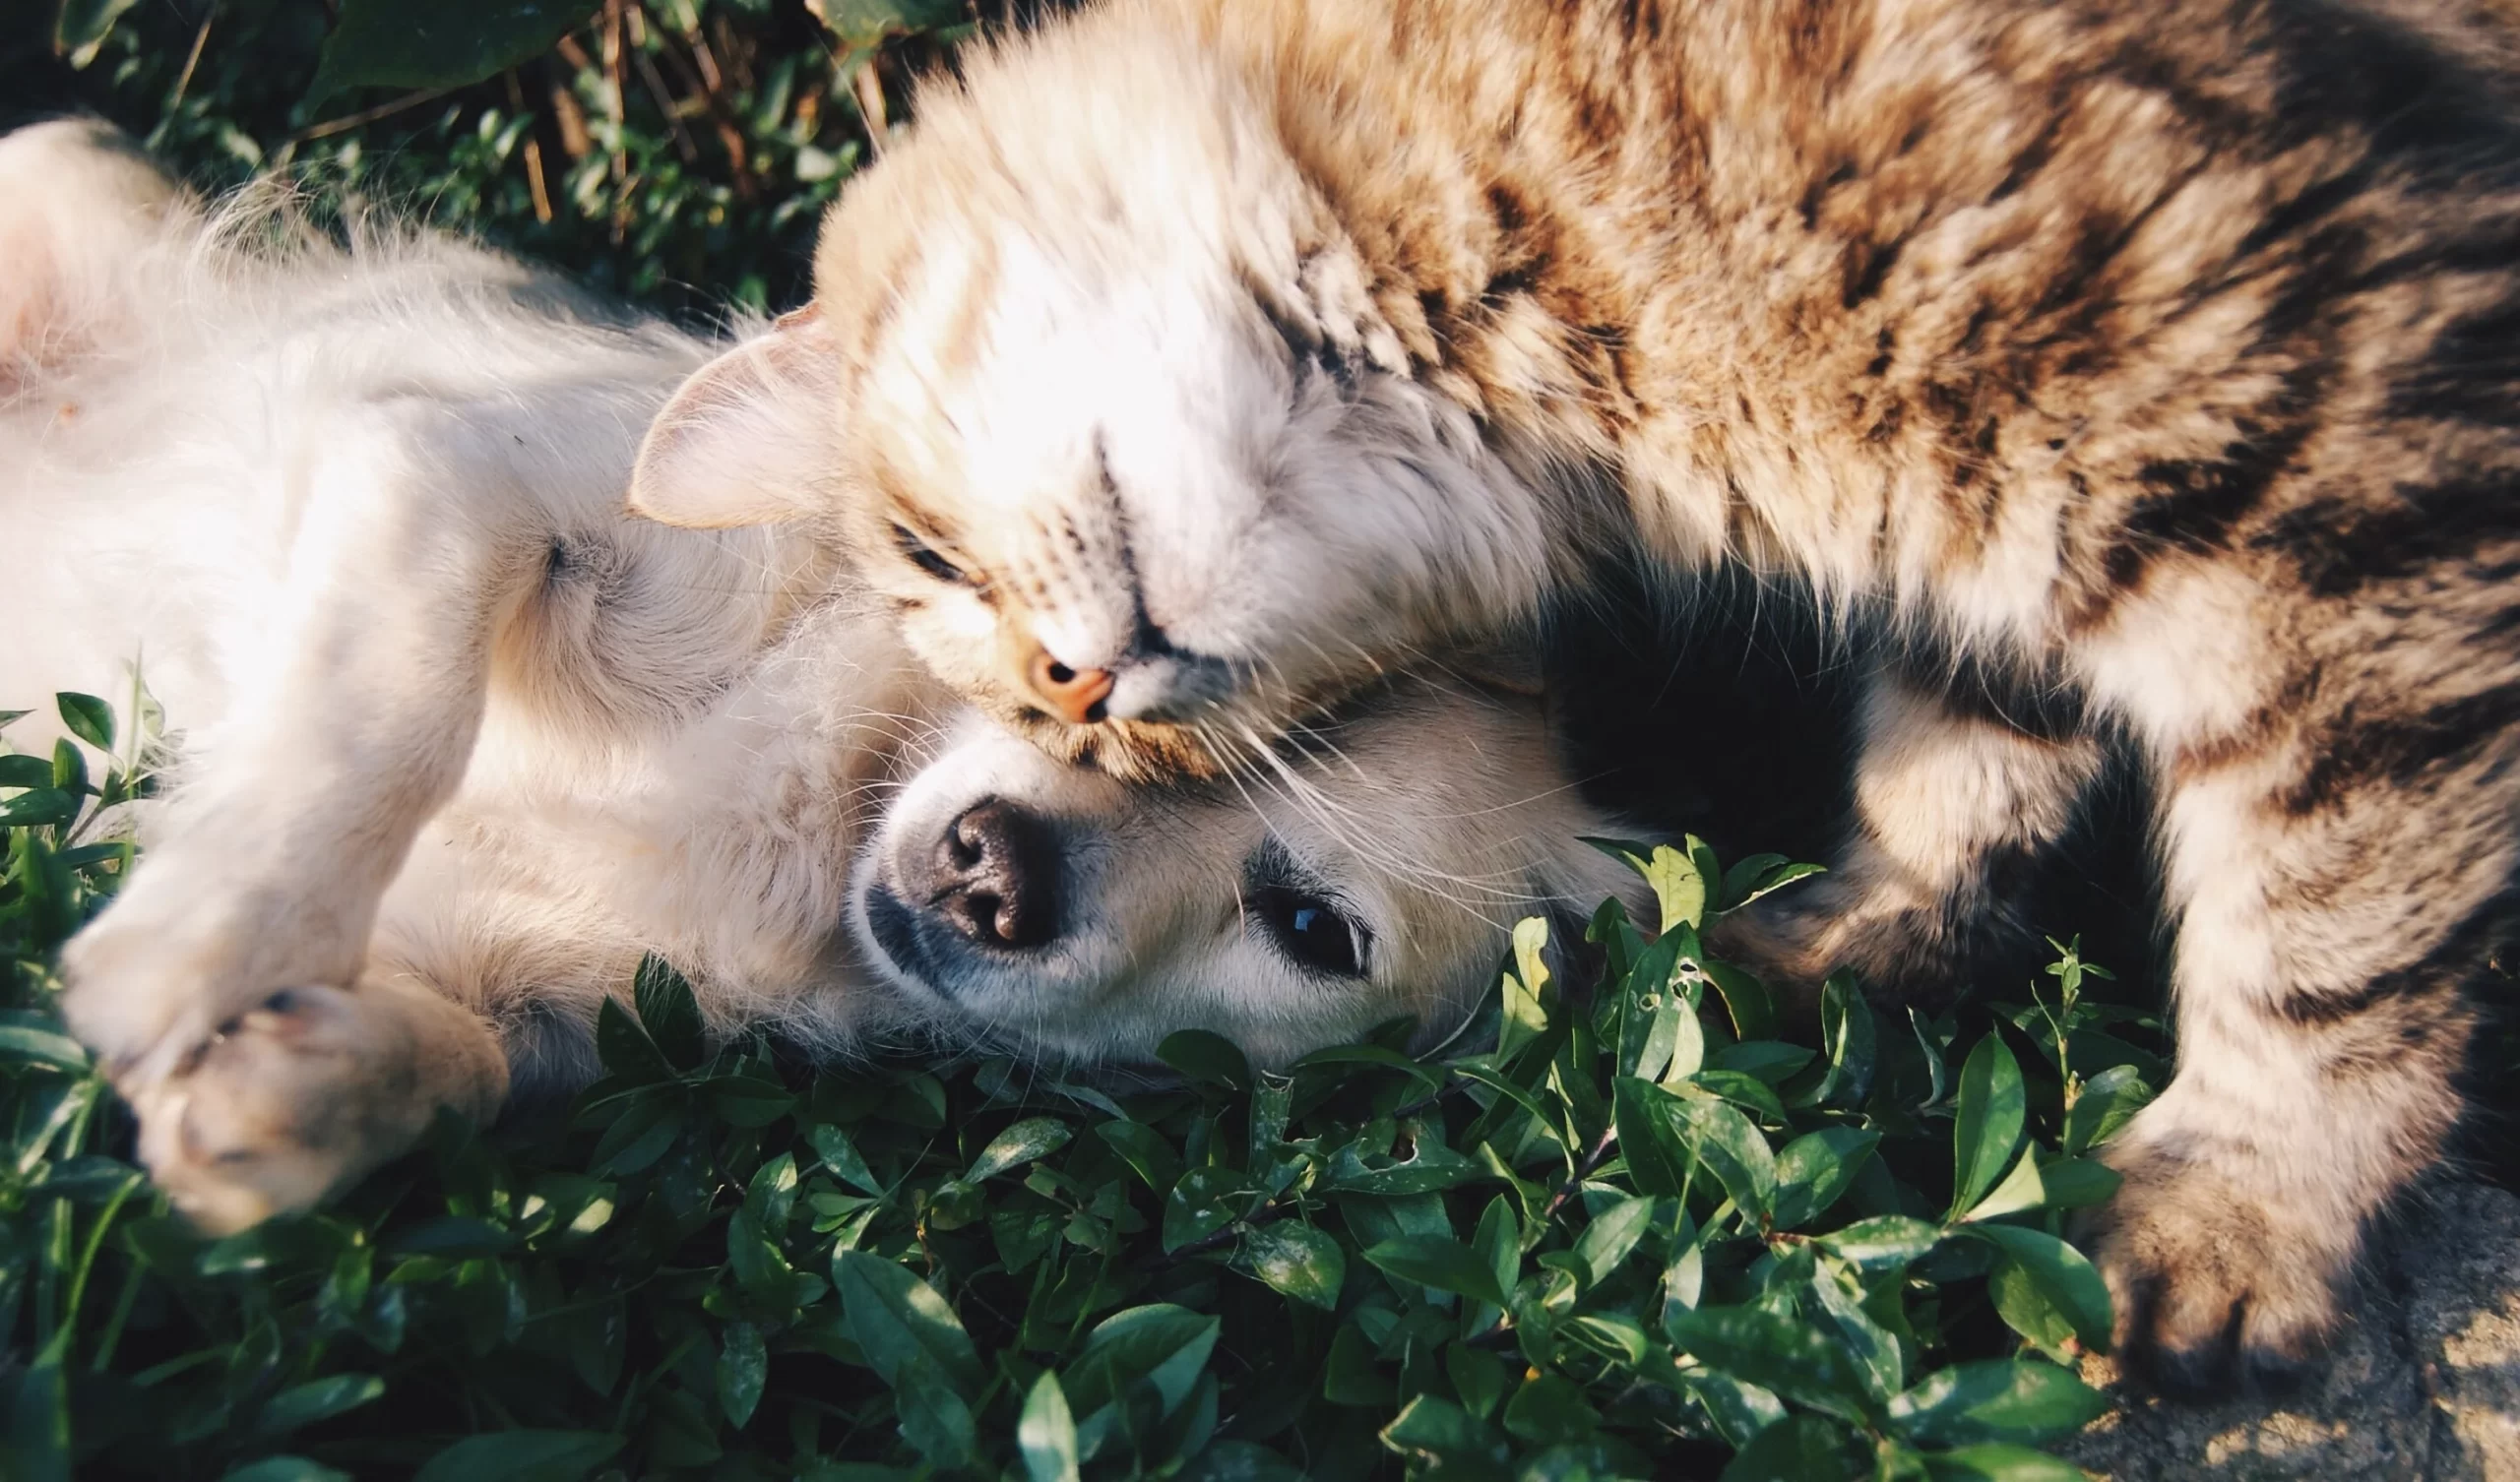 CBD Benefits for your furry friends